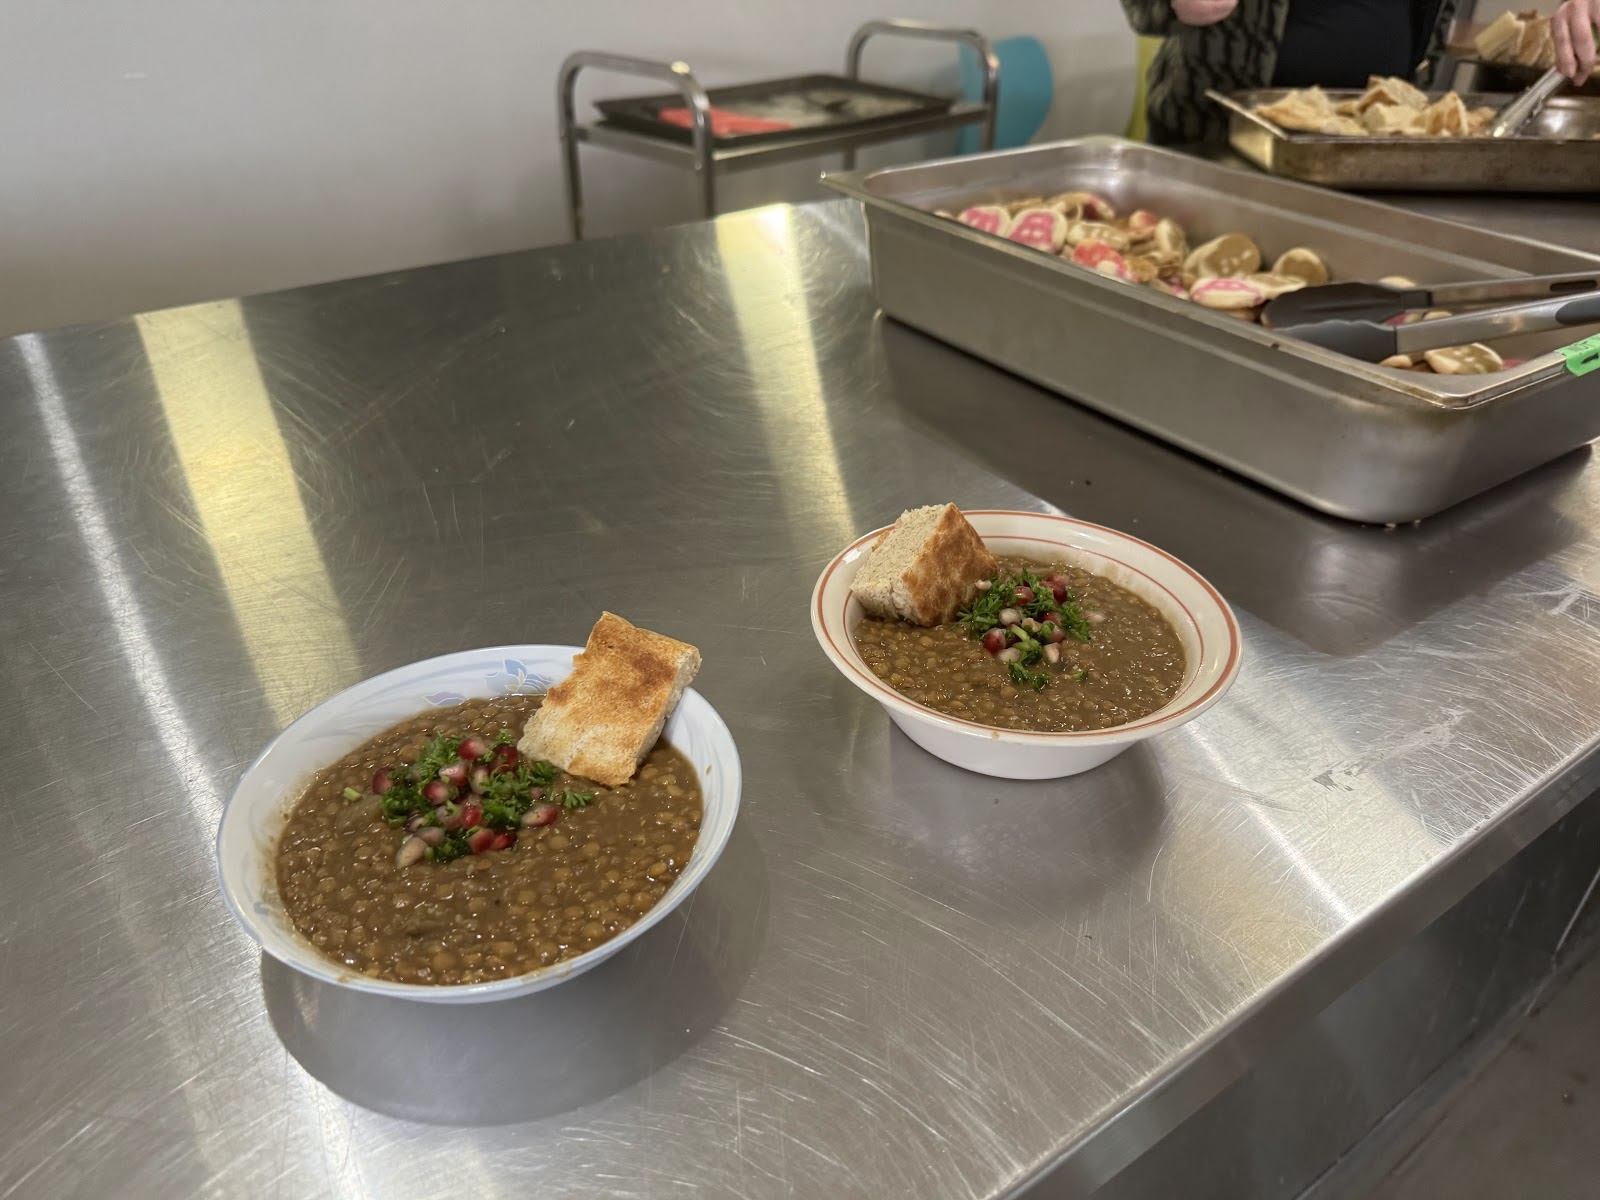 Two bowls of lentil eggplant stew with some parsley and pomegranate seeds on top, served with a piece of bread. In the background, there is a big metal container of cookies and bread.